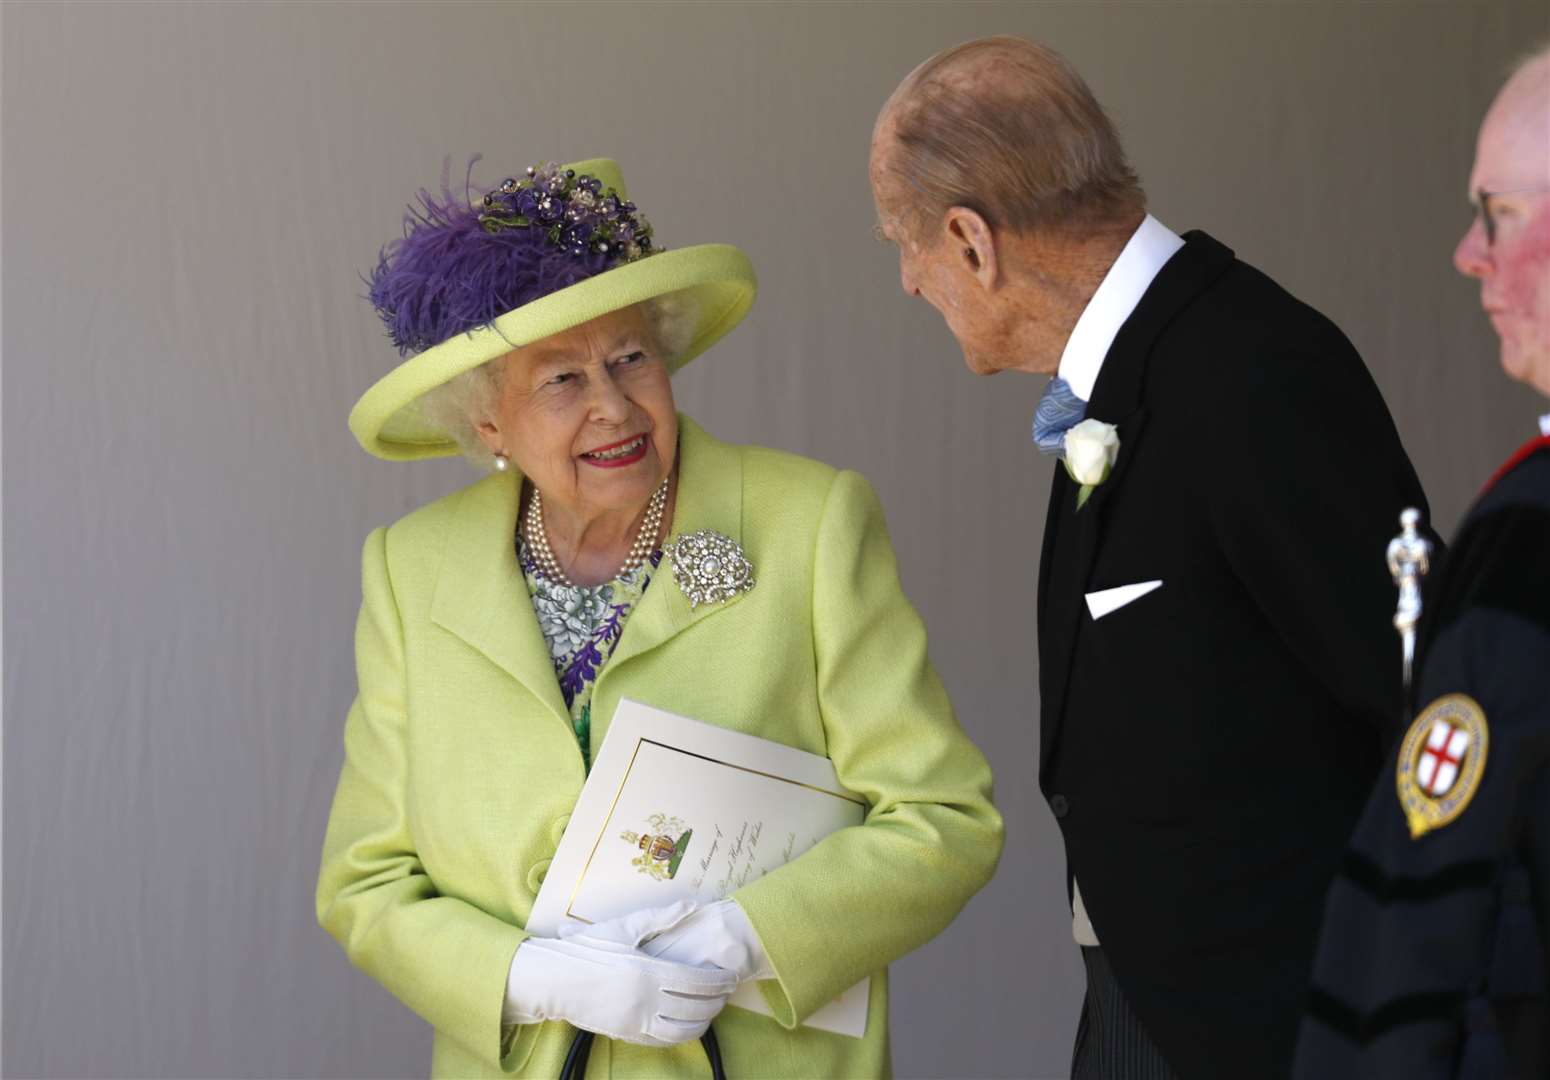 The Queen wore the same brooch to the Sussexes’ wedding in 2018 (Alastair Grant/PA)